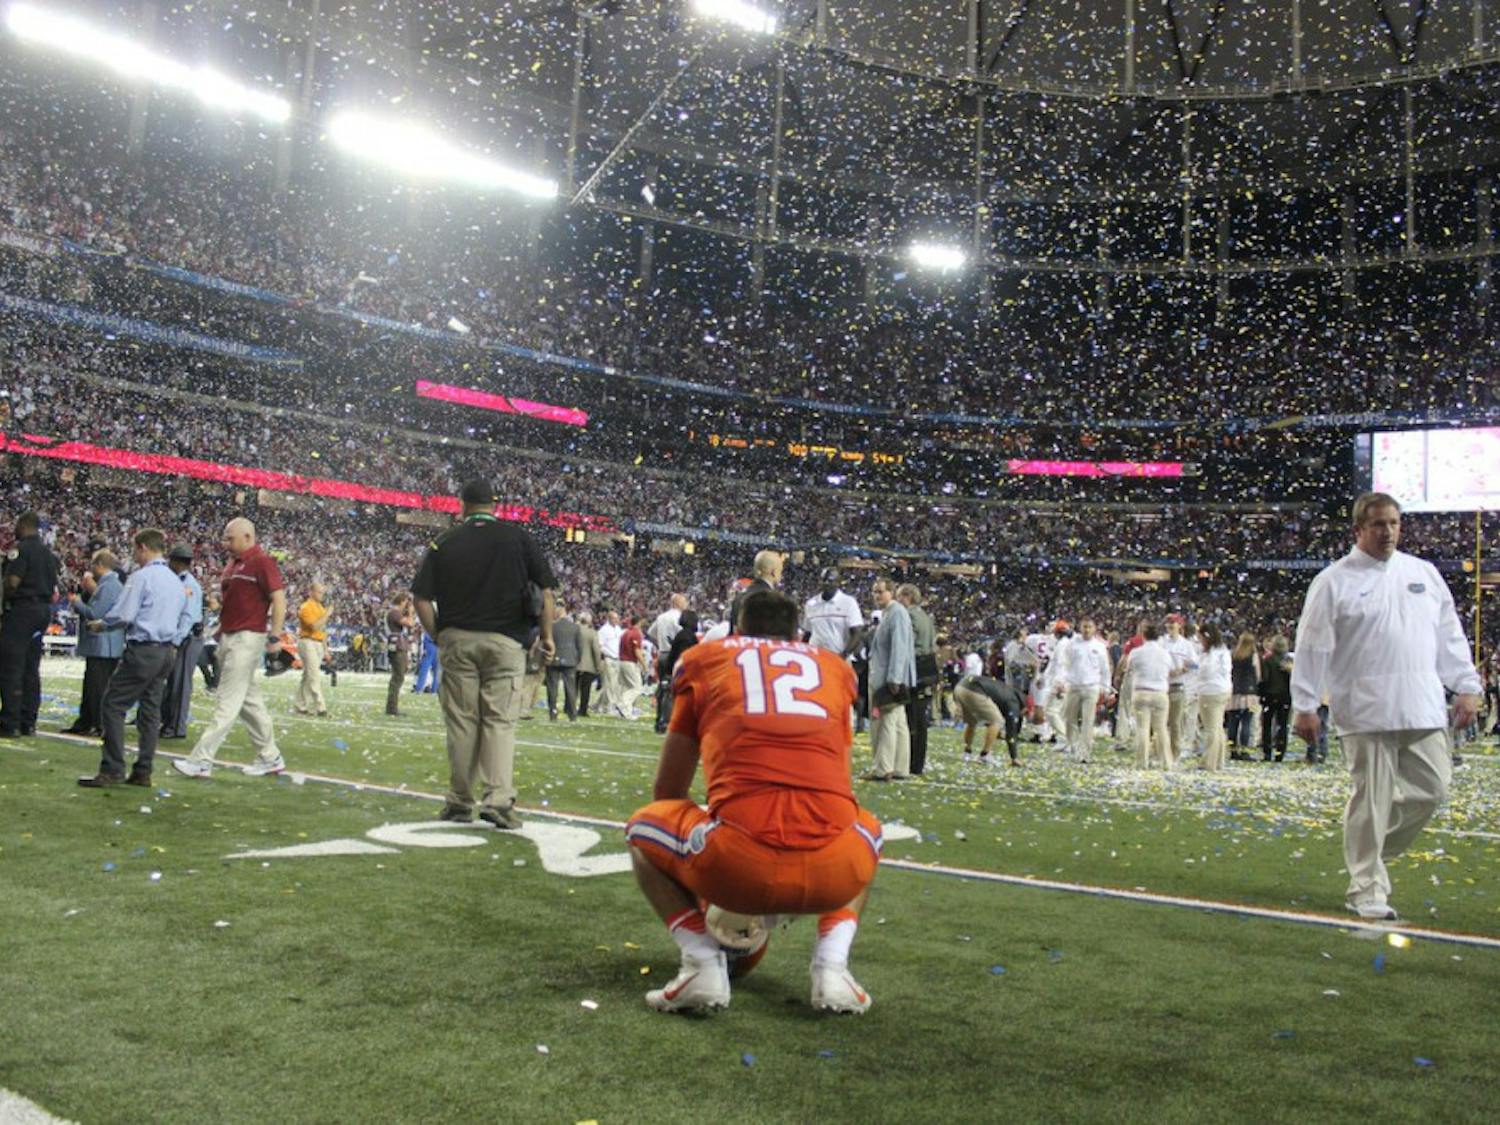 Austin Appleby kneels on the field after Florida's 54-16 loss to Alabama on Dec. 3, 2016, in the SEC Championship Game.